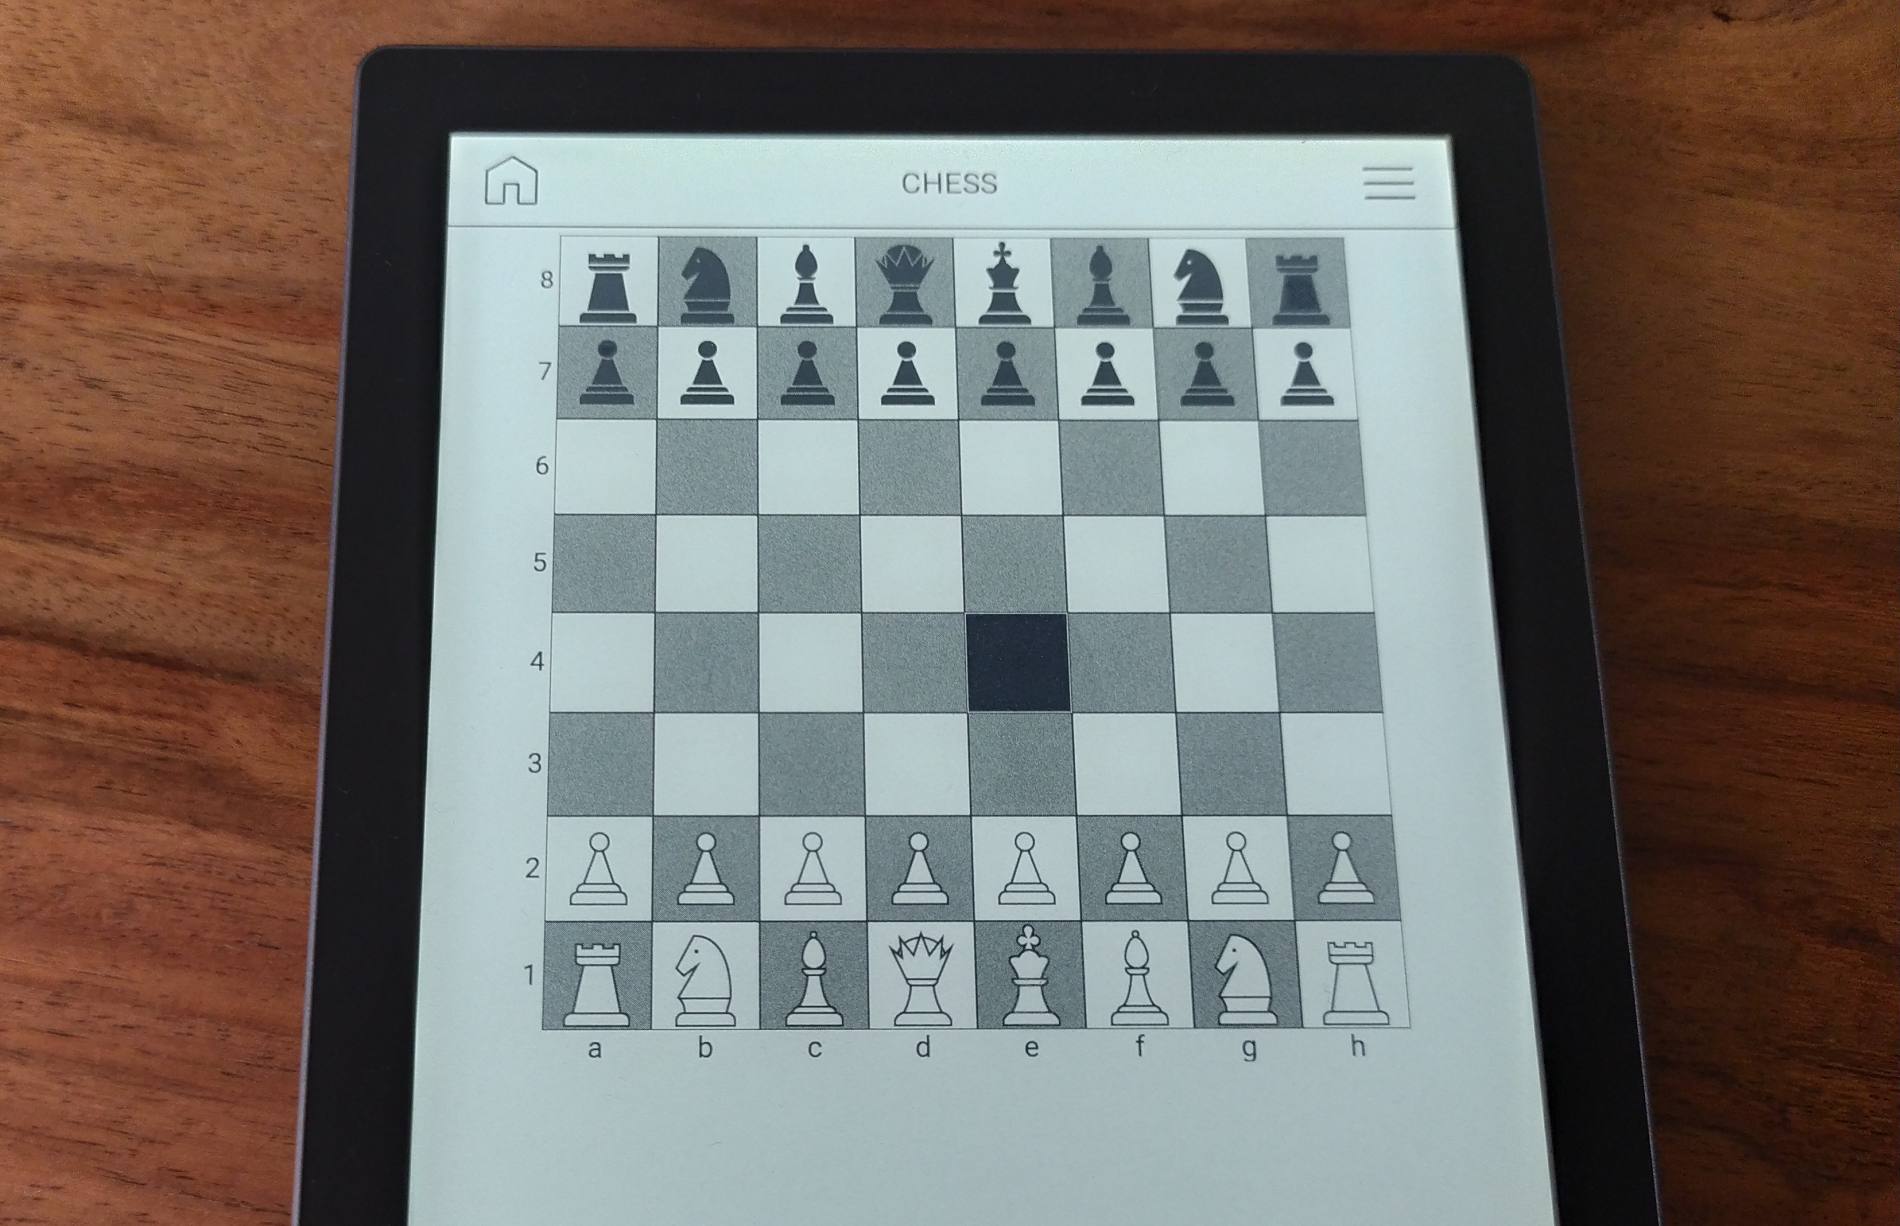 Pocketbook Verse Pro chess game